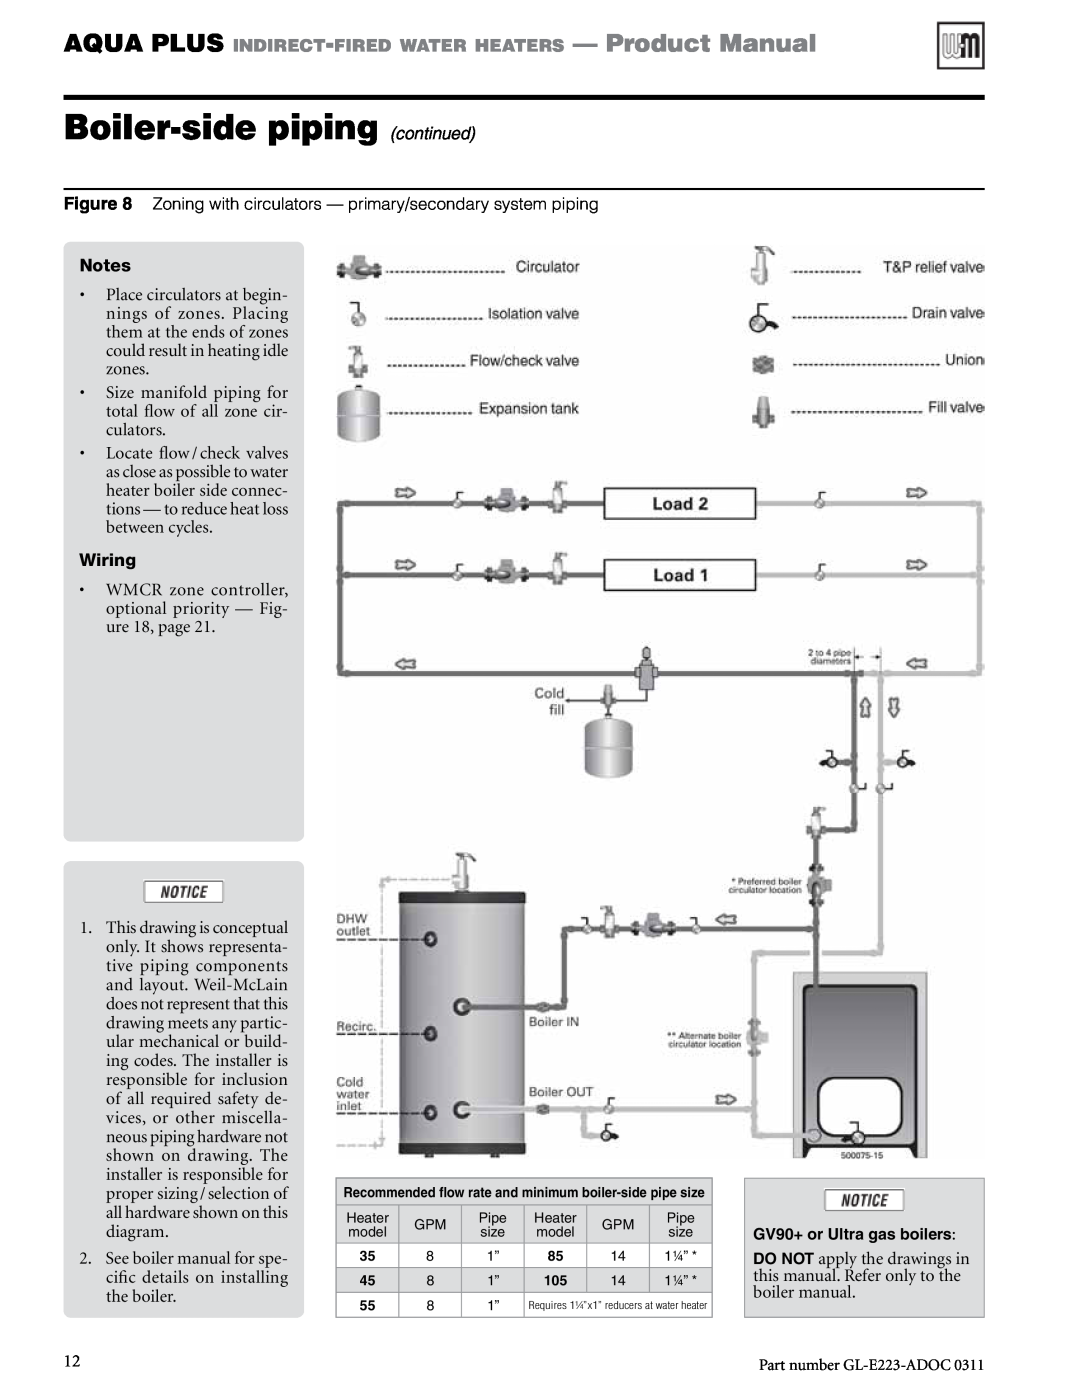 Weil-McLain GL-E223-ADOC 0311 manual Boiler-sidepiping continued, Wiring 